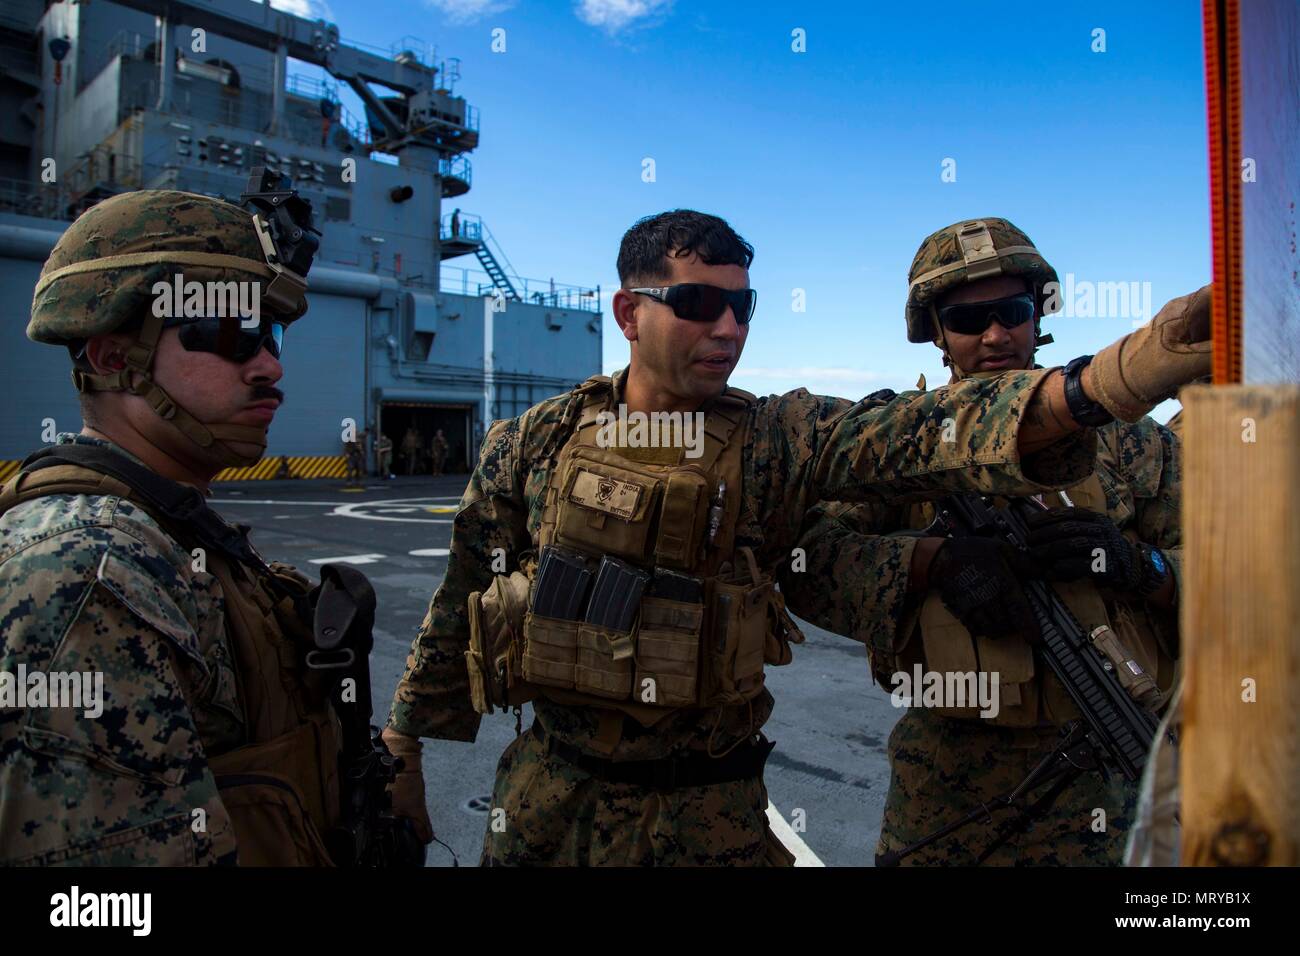 U.S. Marine Corps Sgt. Elvis Nunez, an infantryman with Task Force Koa Moana 17, center, analyzes the shot groups of Marines during a live fire range aboard the USNS Sacagawea, July 13, 2017. Koa Moana 17 is designed to improve interoperability with our partners, enhance military-to-military relations, and expose the Marine Corps forces to different types of terrain for familiarity in the event of a natural disaster in the region.   (U.S. Marine Corps photo by MCIPAC Combat Camera Lance Cpl. Juan C. Bustos) Stock Photo